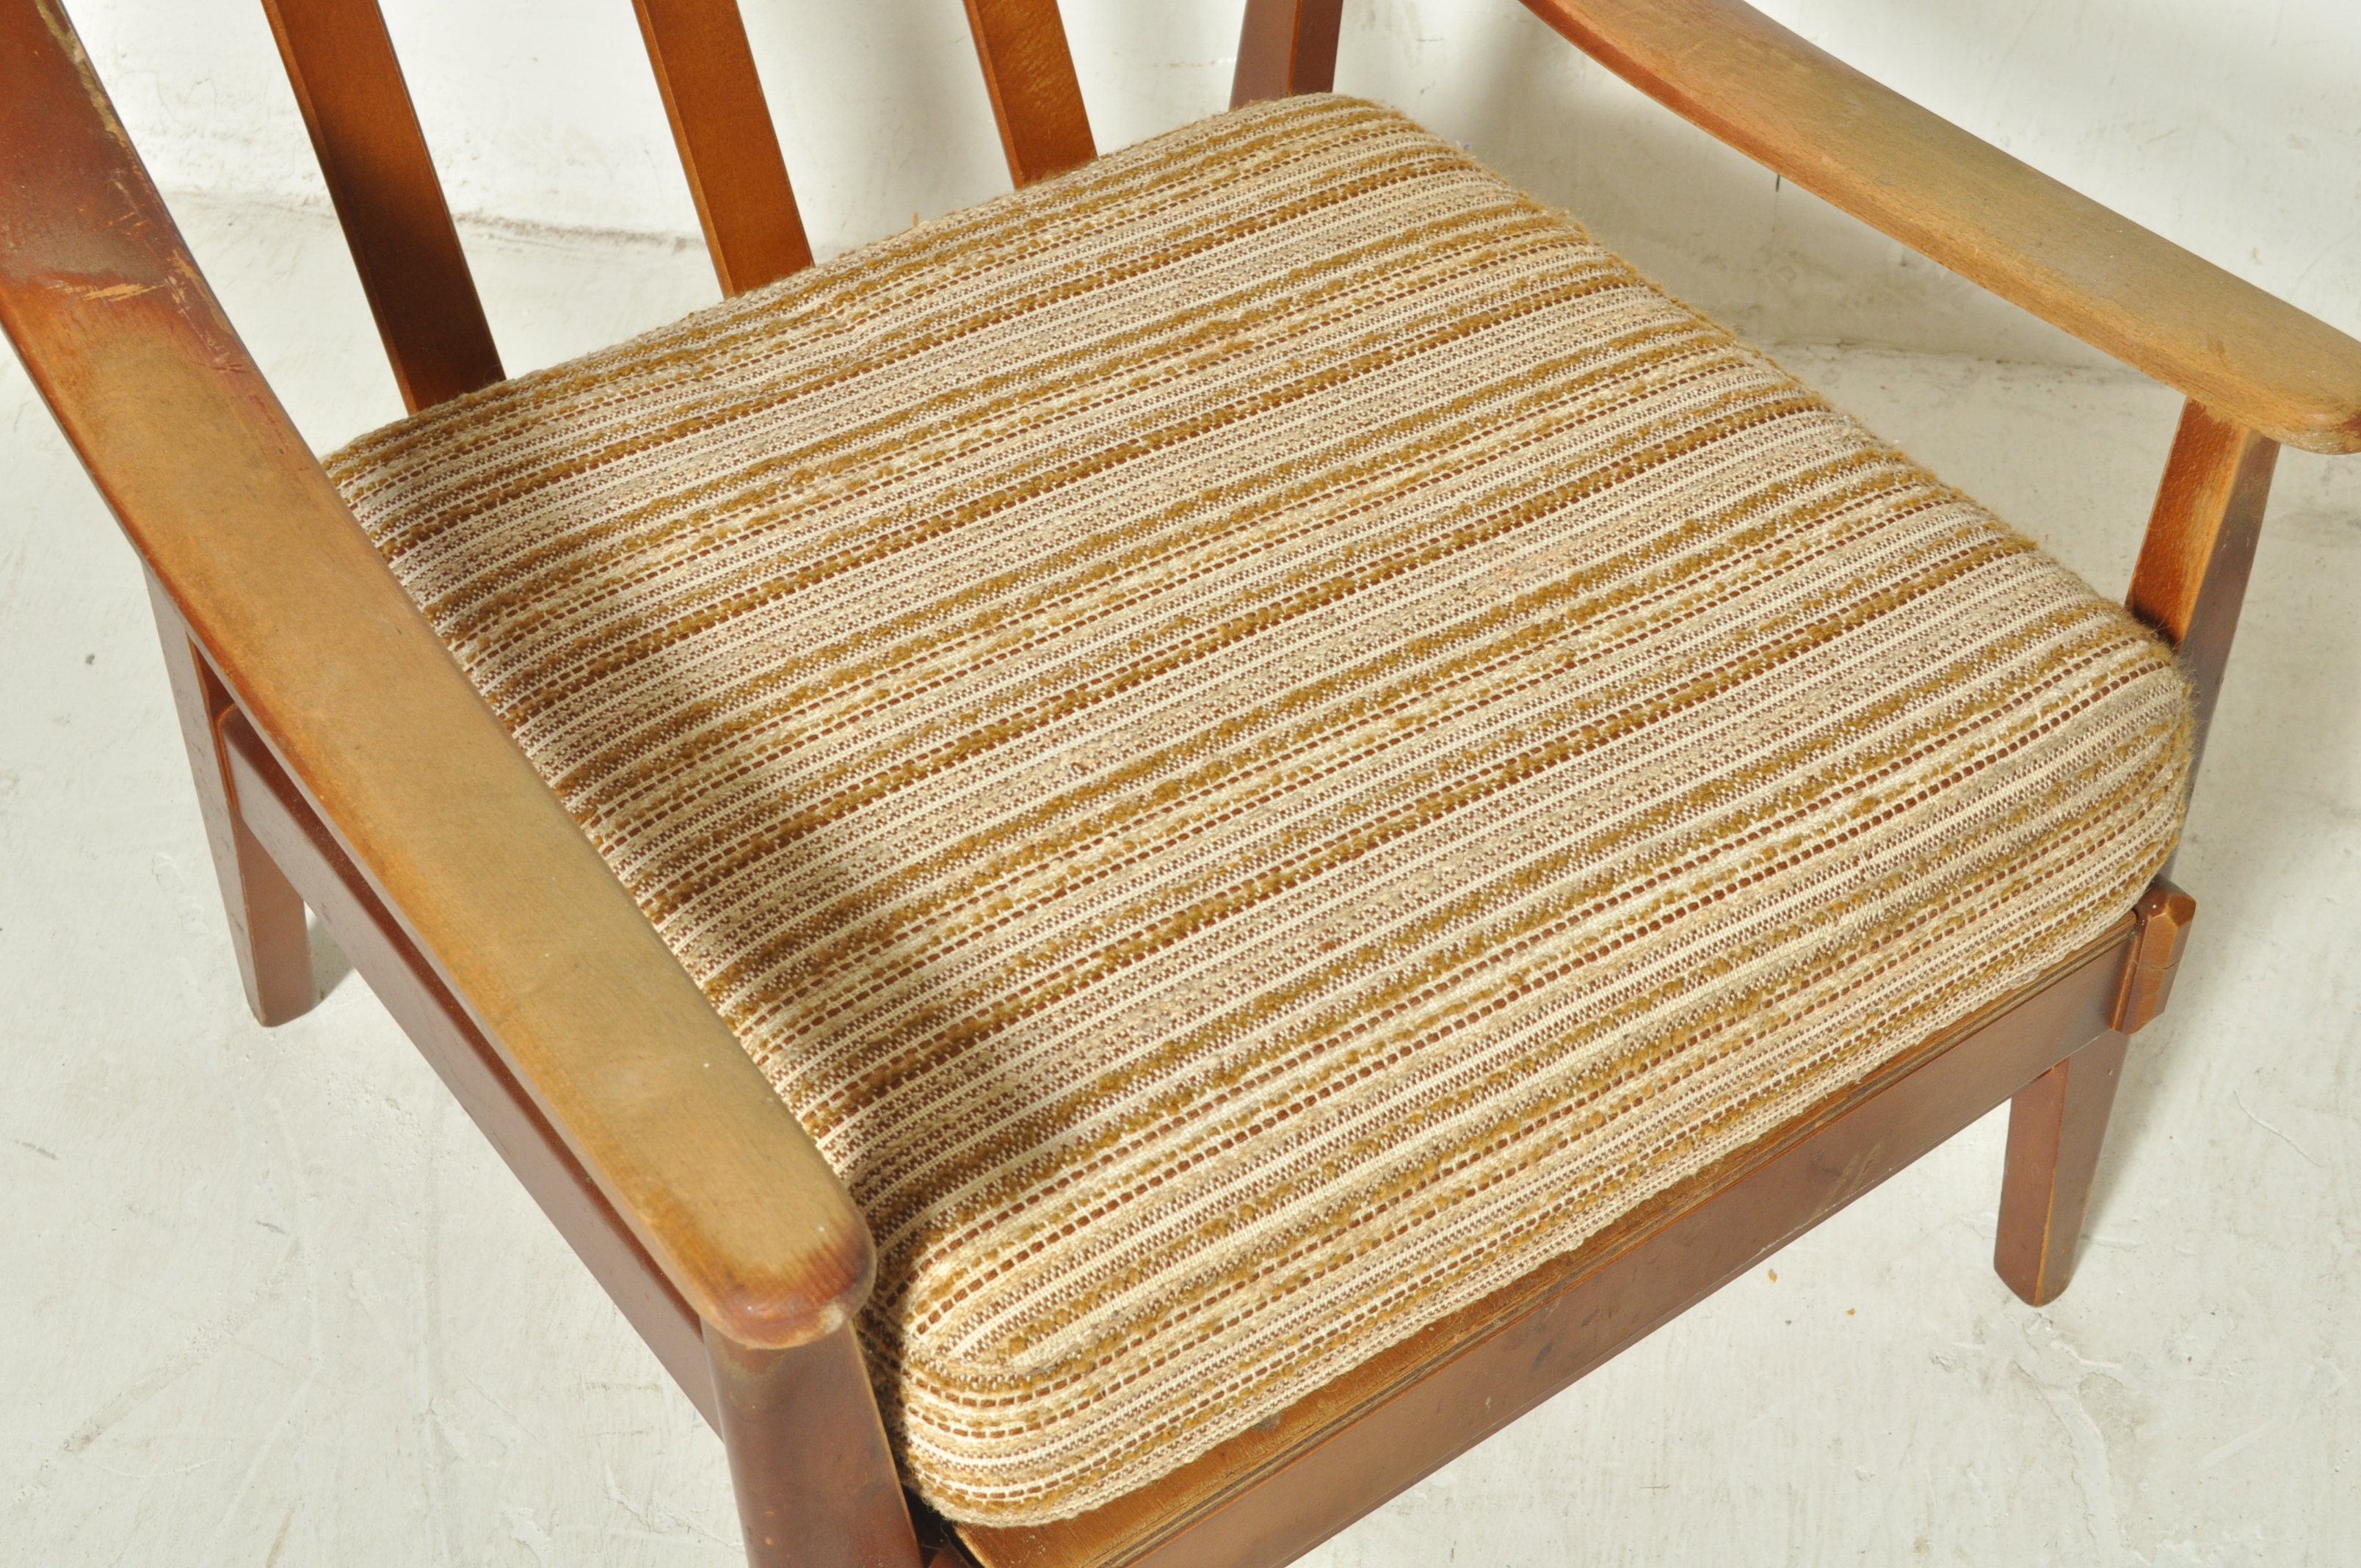 MID 20TH CENTURY DANISH INSPIRED SHOW WOOD EASY CHAIR - Image 4 of 5